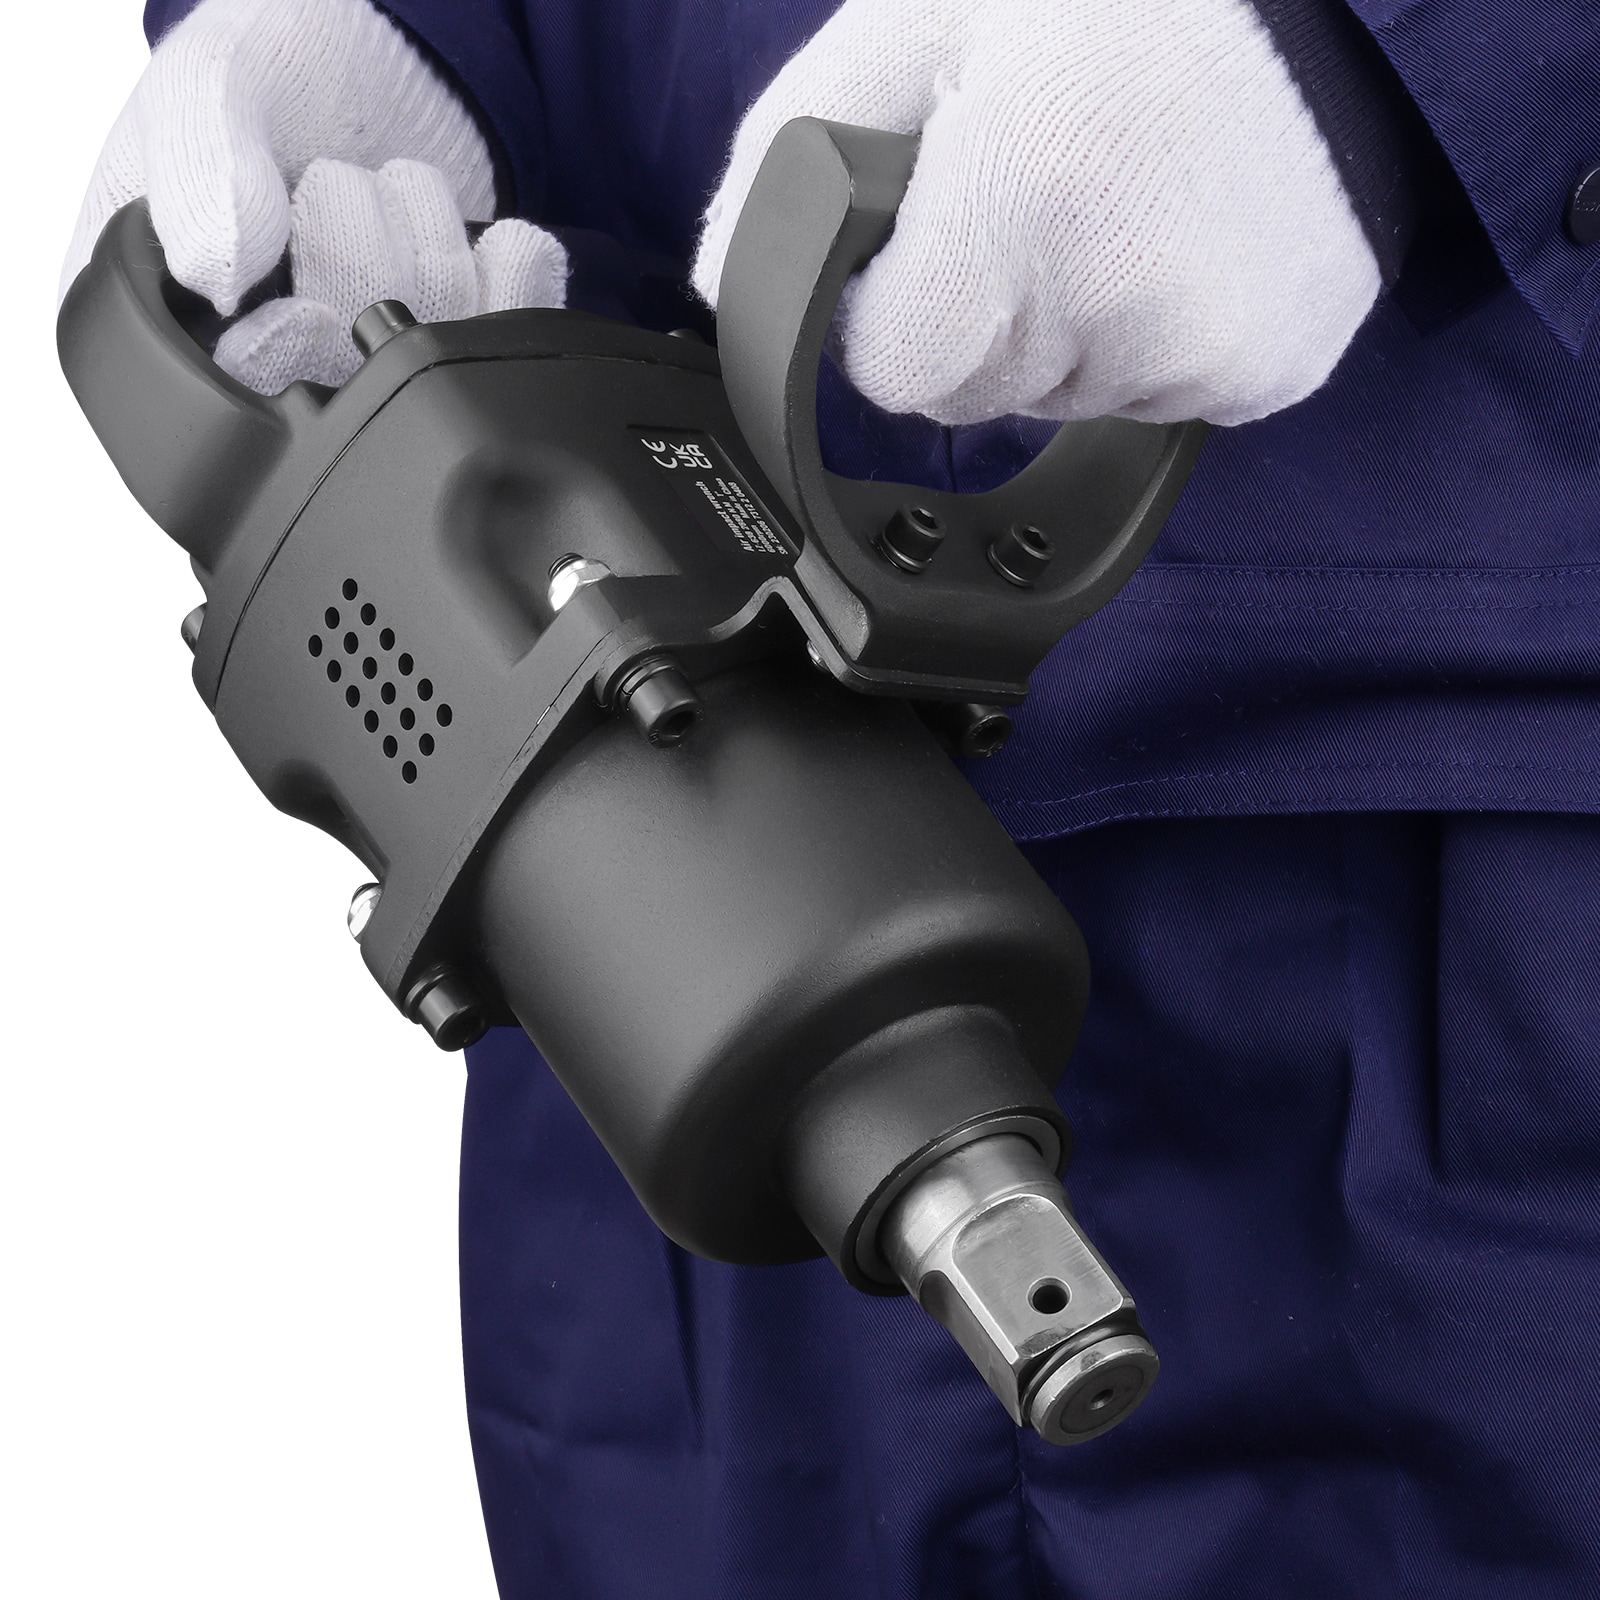 VEVOR 1-in 2400-ft lb Air Impact Wrench in the Air Impact Wrenches